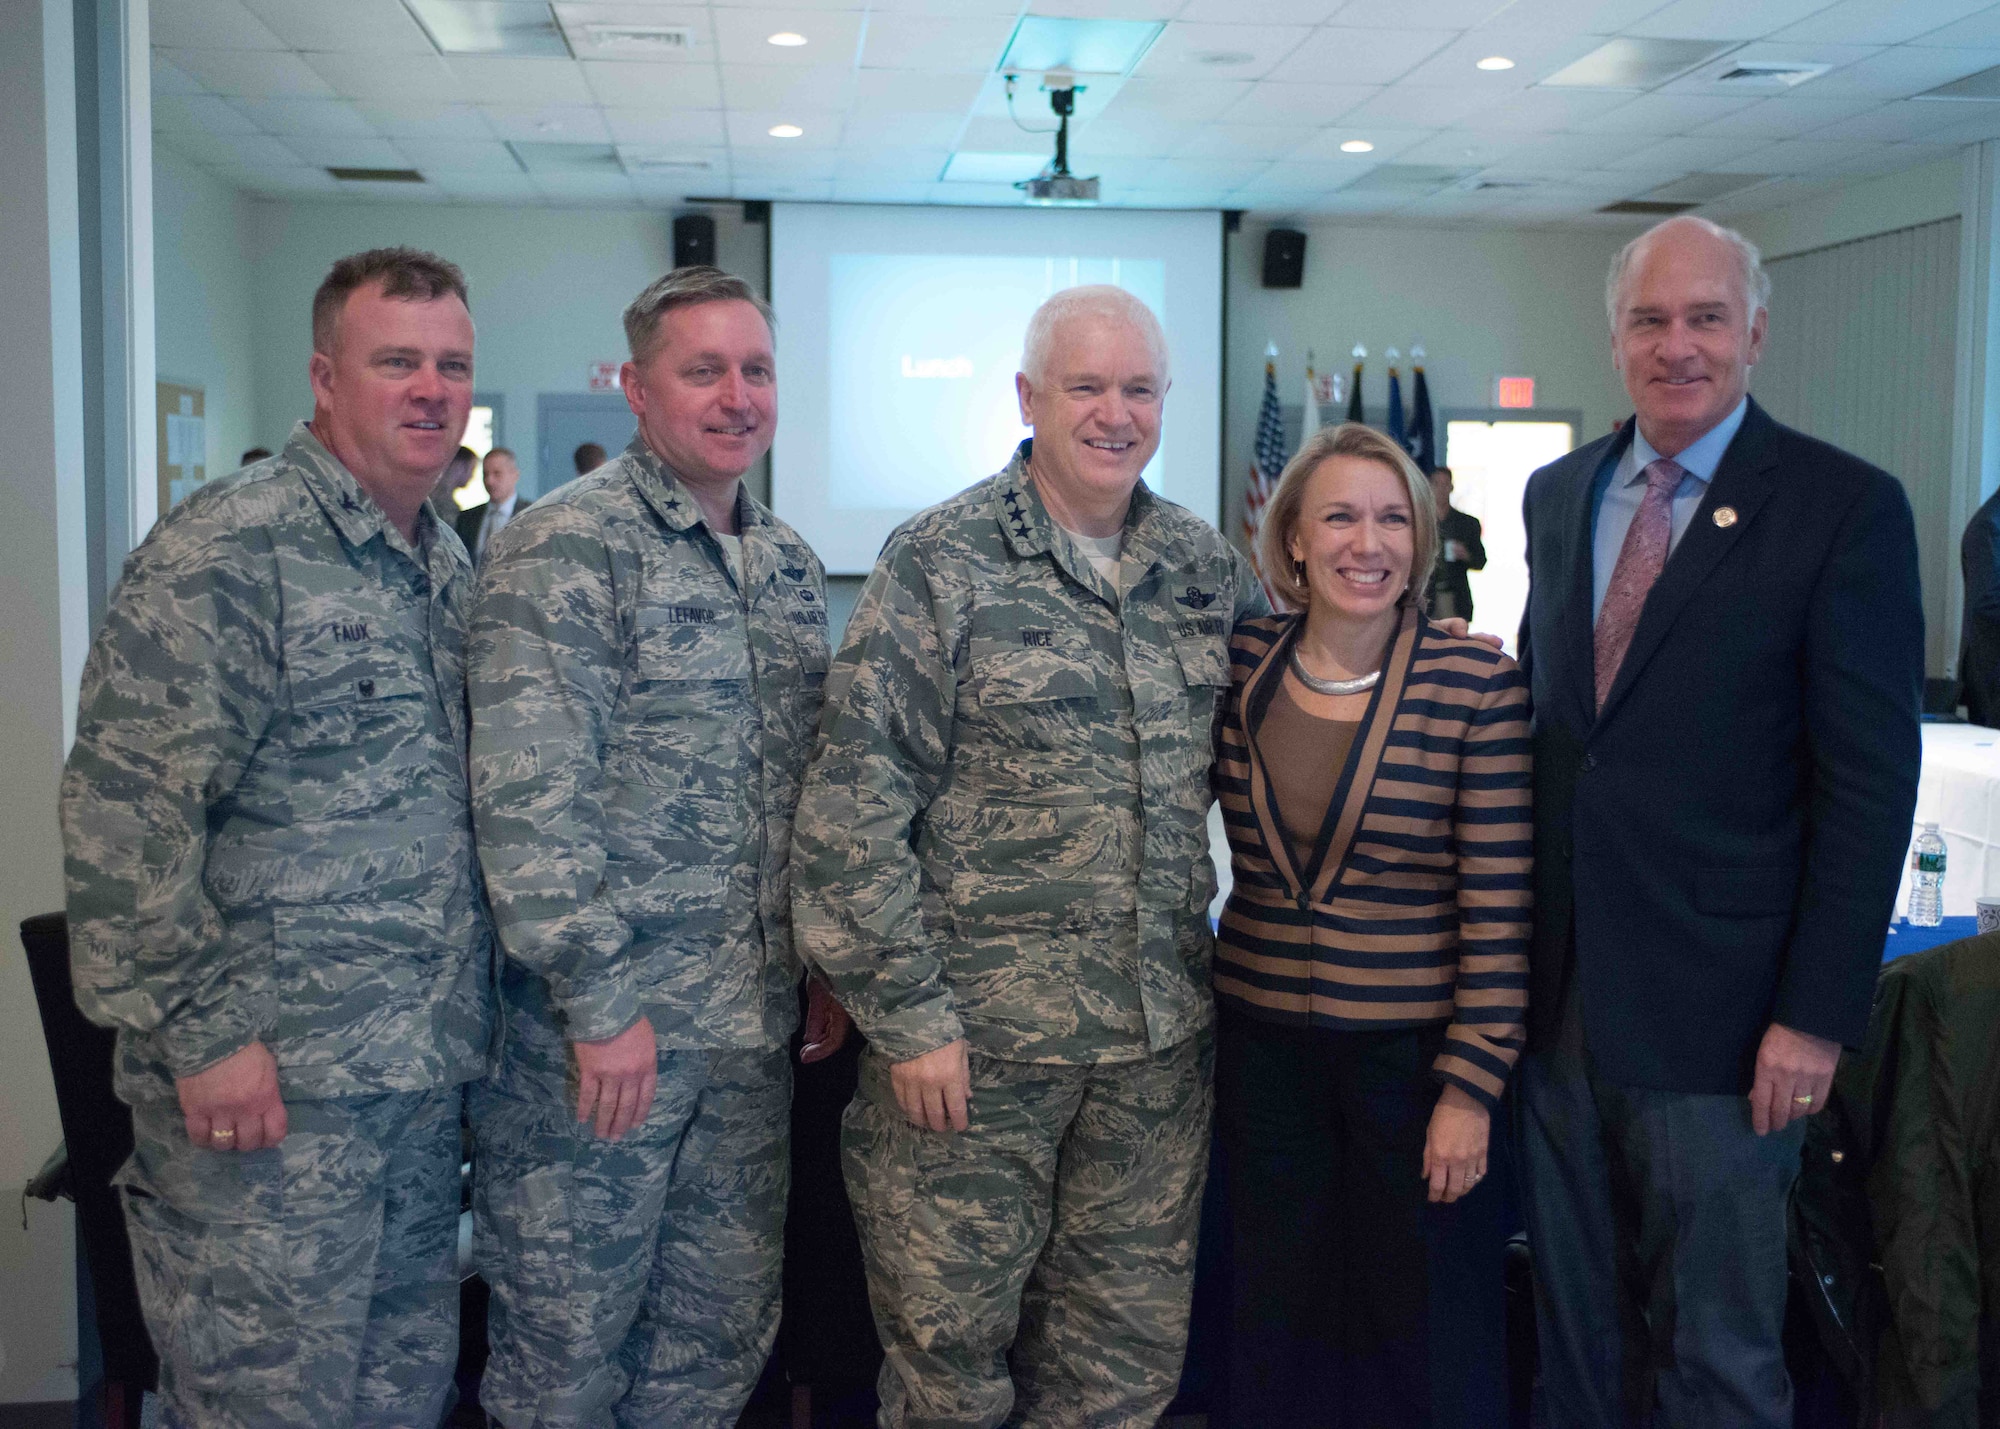 The 102nd Intelligence Wing hosts a number of high-ranking military and government officials as well as innovators from several high-tech energy companies during a leadership summit at Otis Air National Guard Base Oct. 25, 2016. The summit focused on the upcoming Otis Microgrid Project, an electrical network that ties into renewable energy sources, can operate if the commercial network fails, and allows the base to reduce its energy costs.(Air National Guard photo by Mr. Timothy Sandland/released)